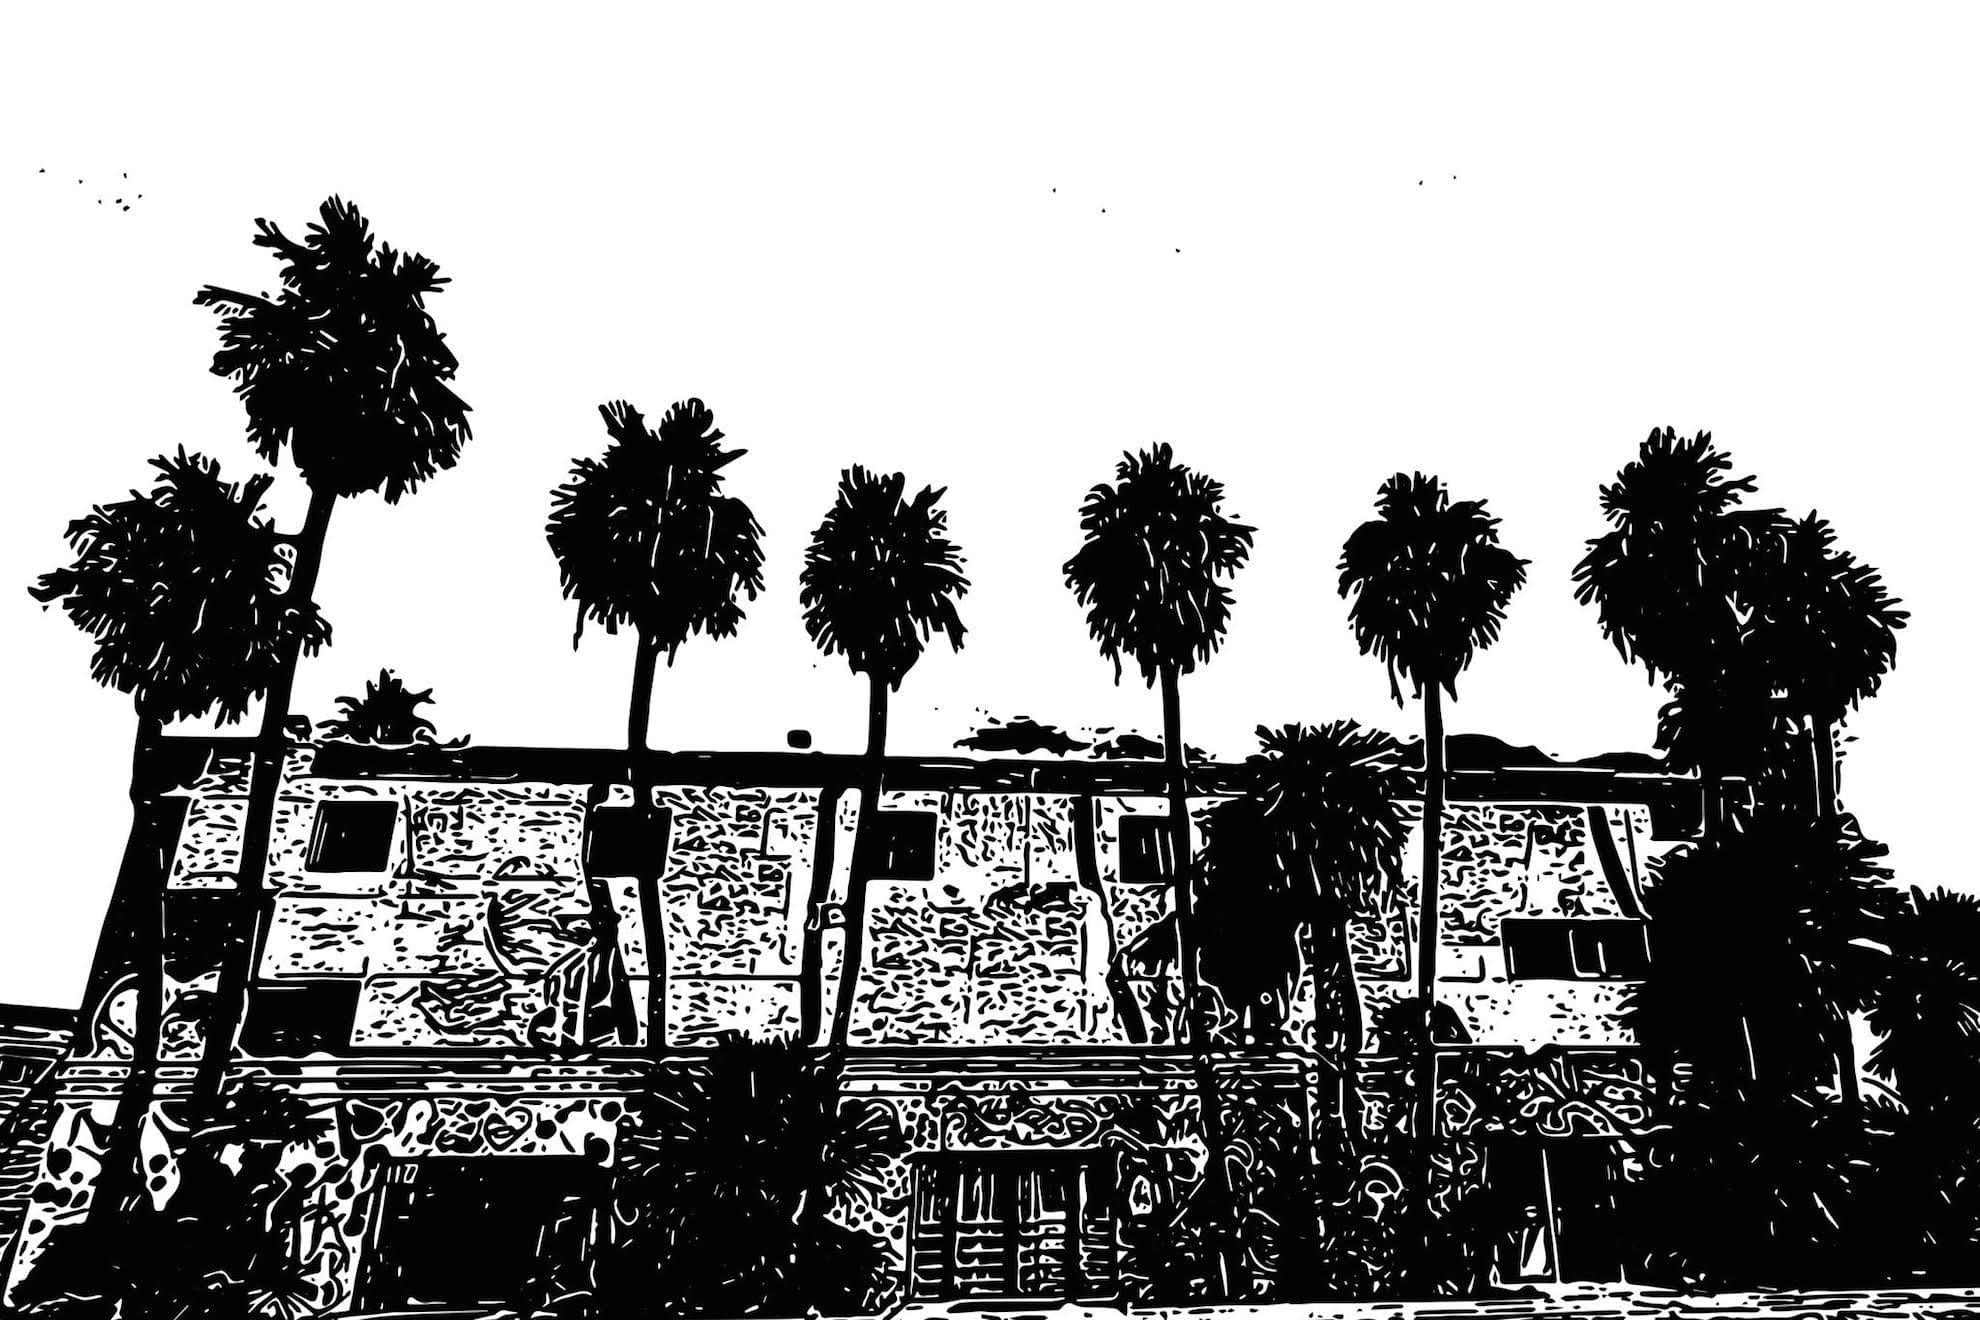 Vegas Punk Rock Museum exterior in black and white with palm trees